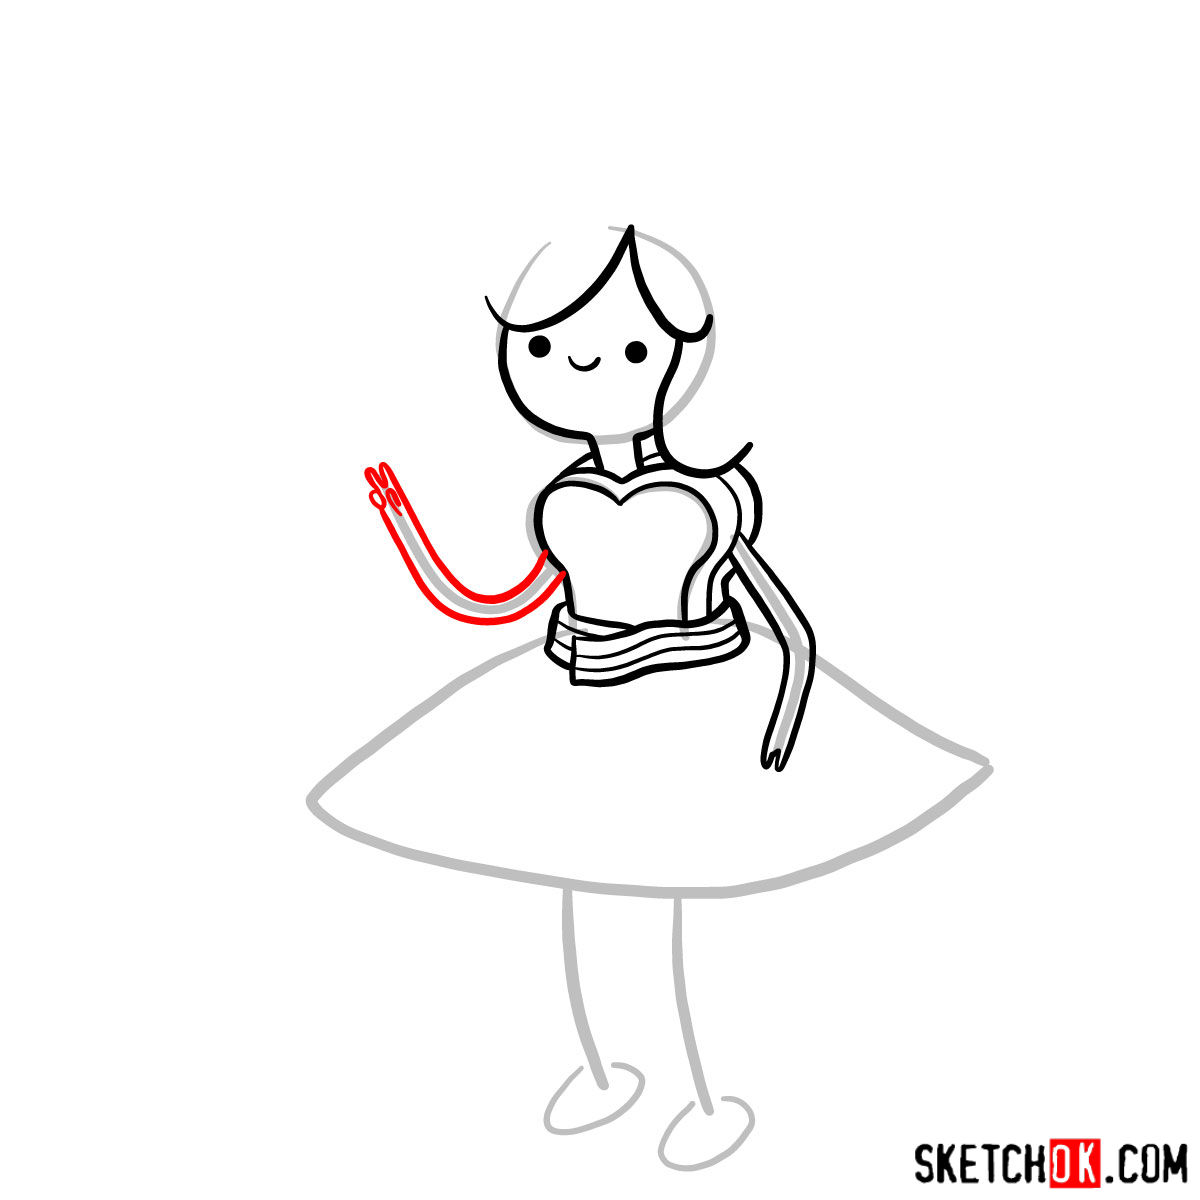 How to draw Breakfast Princess from Adventure Time - step 07